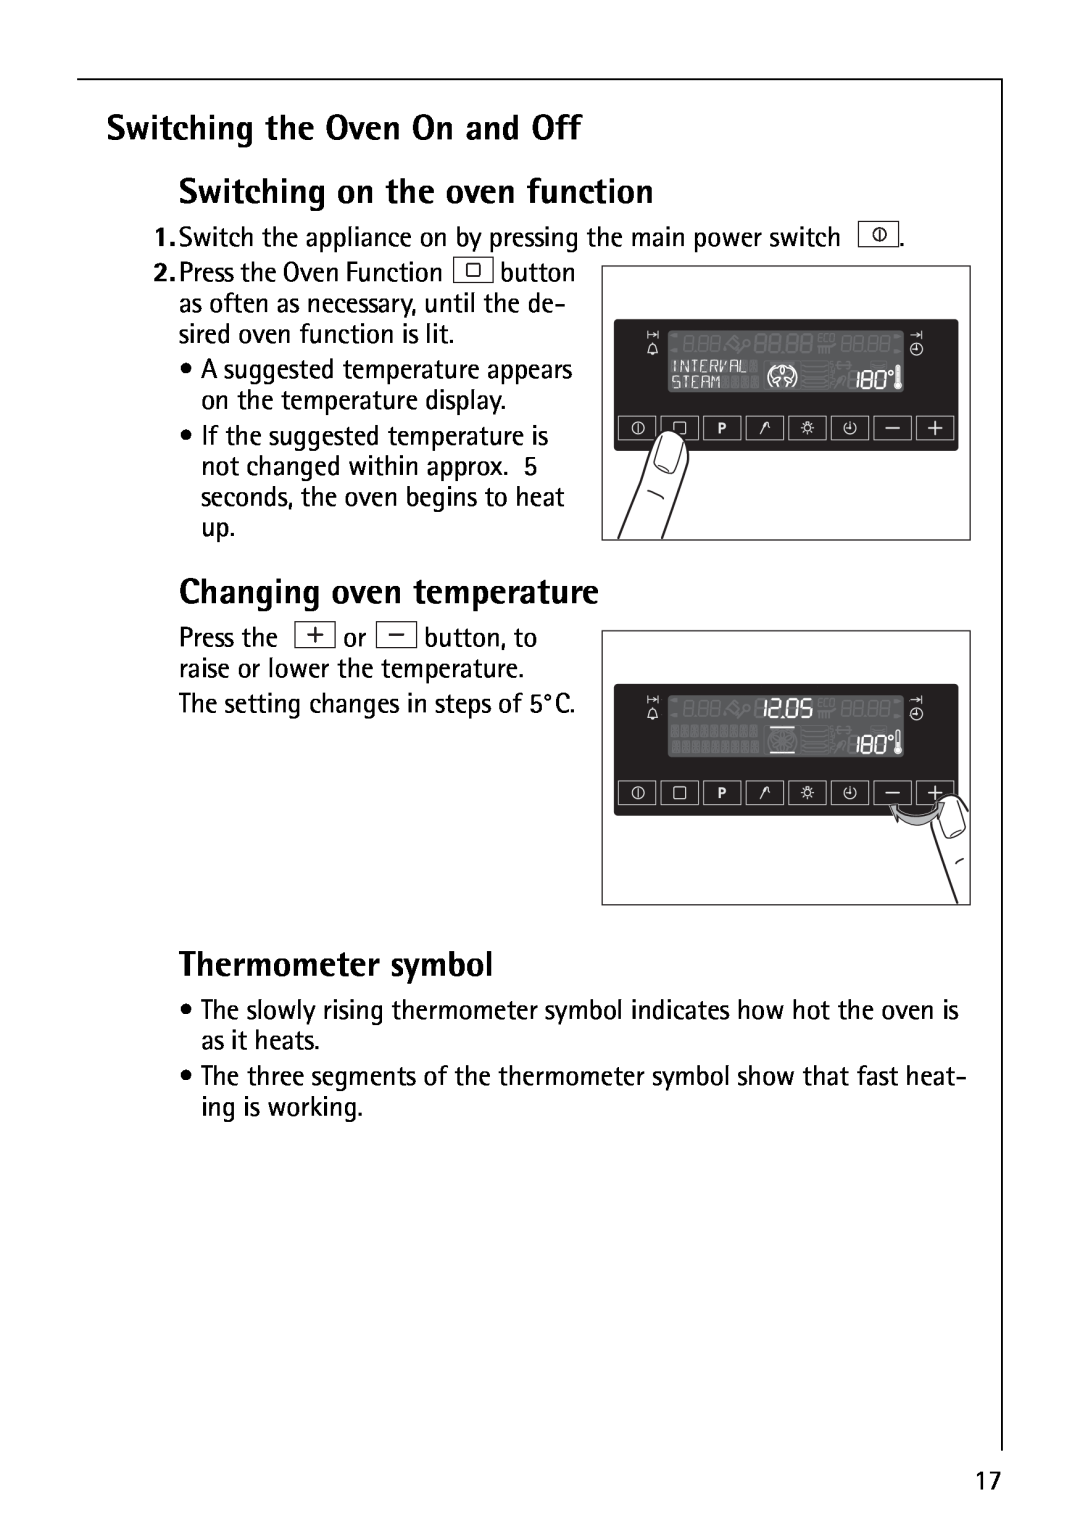 AEG B8920-1 Switching the Oven On and Off, Switching on the oven function, Changing oven temperature, Thermometer symbol 